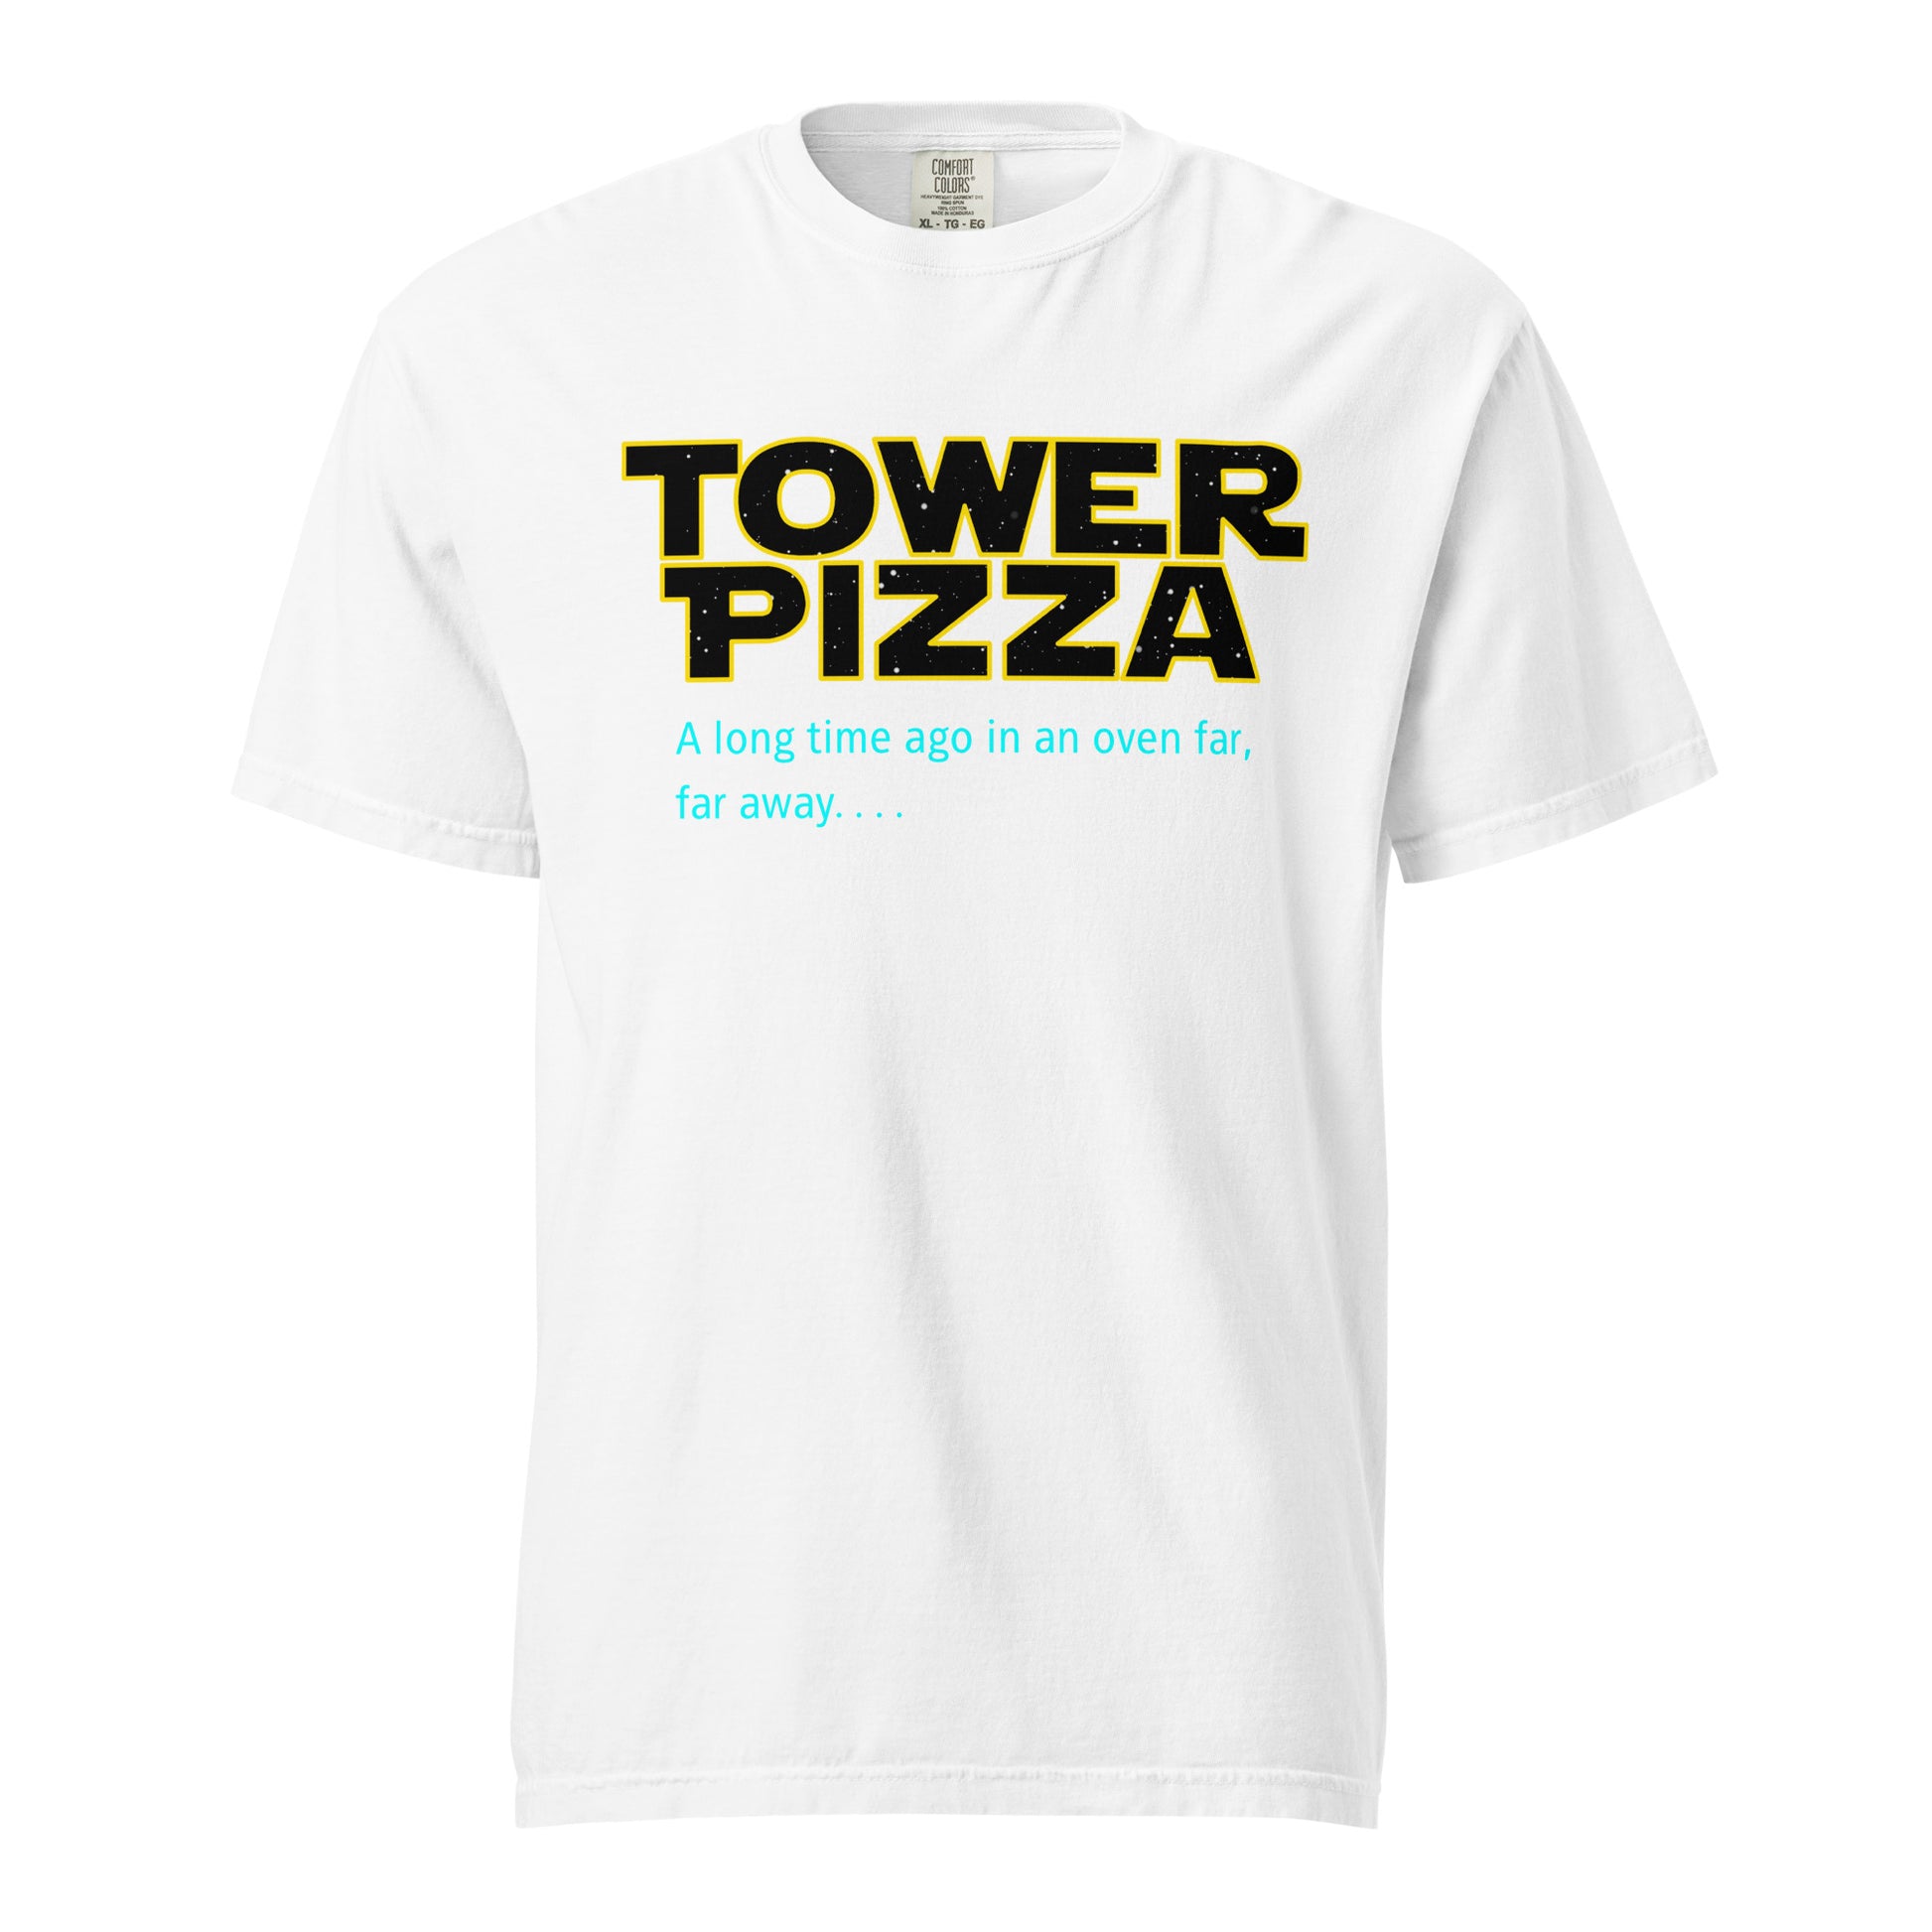 Tower Pizza "A long time ago.." t-shirt - Tower Pizza Gift Shop